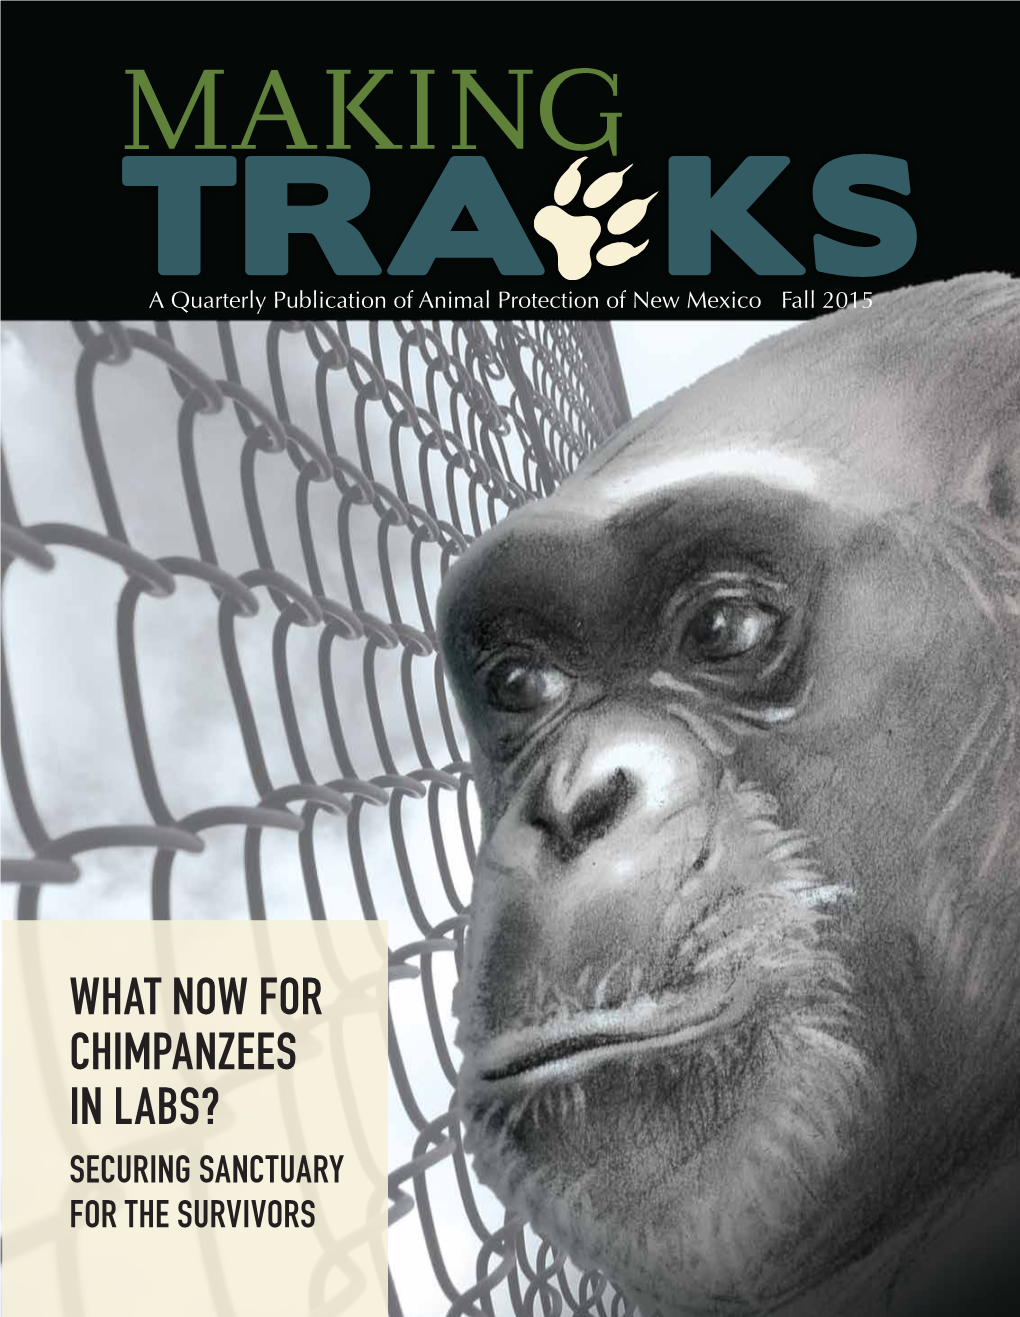 What Now for Chimpanzees in Labs?